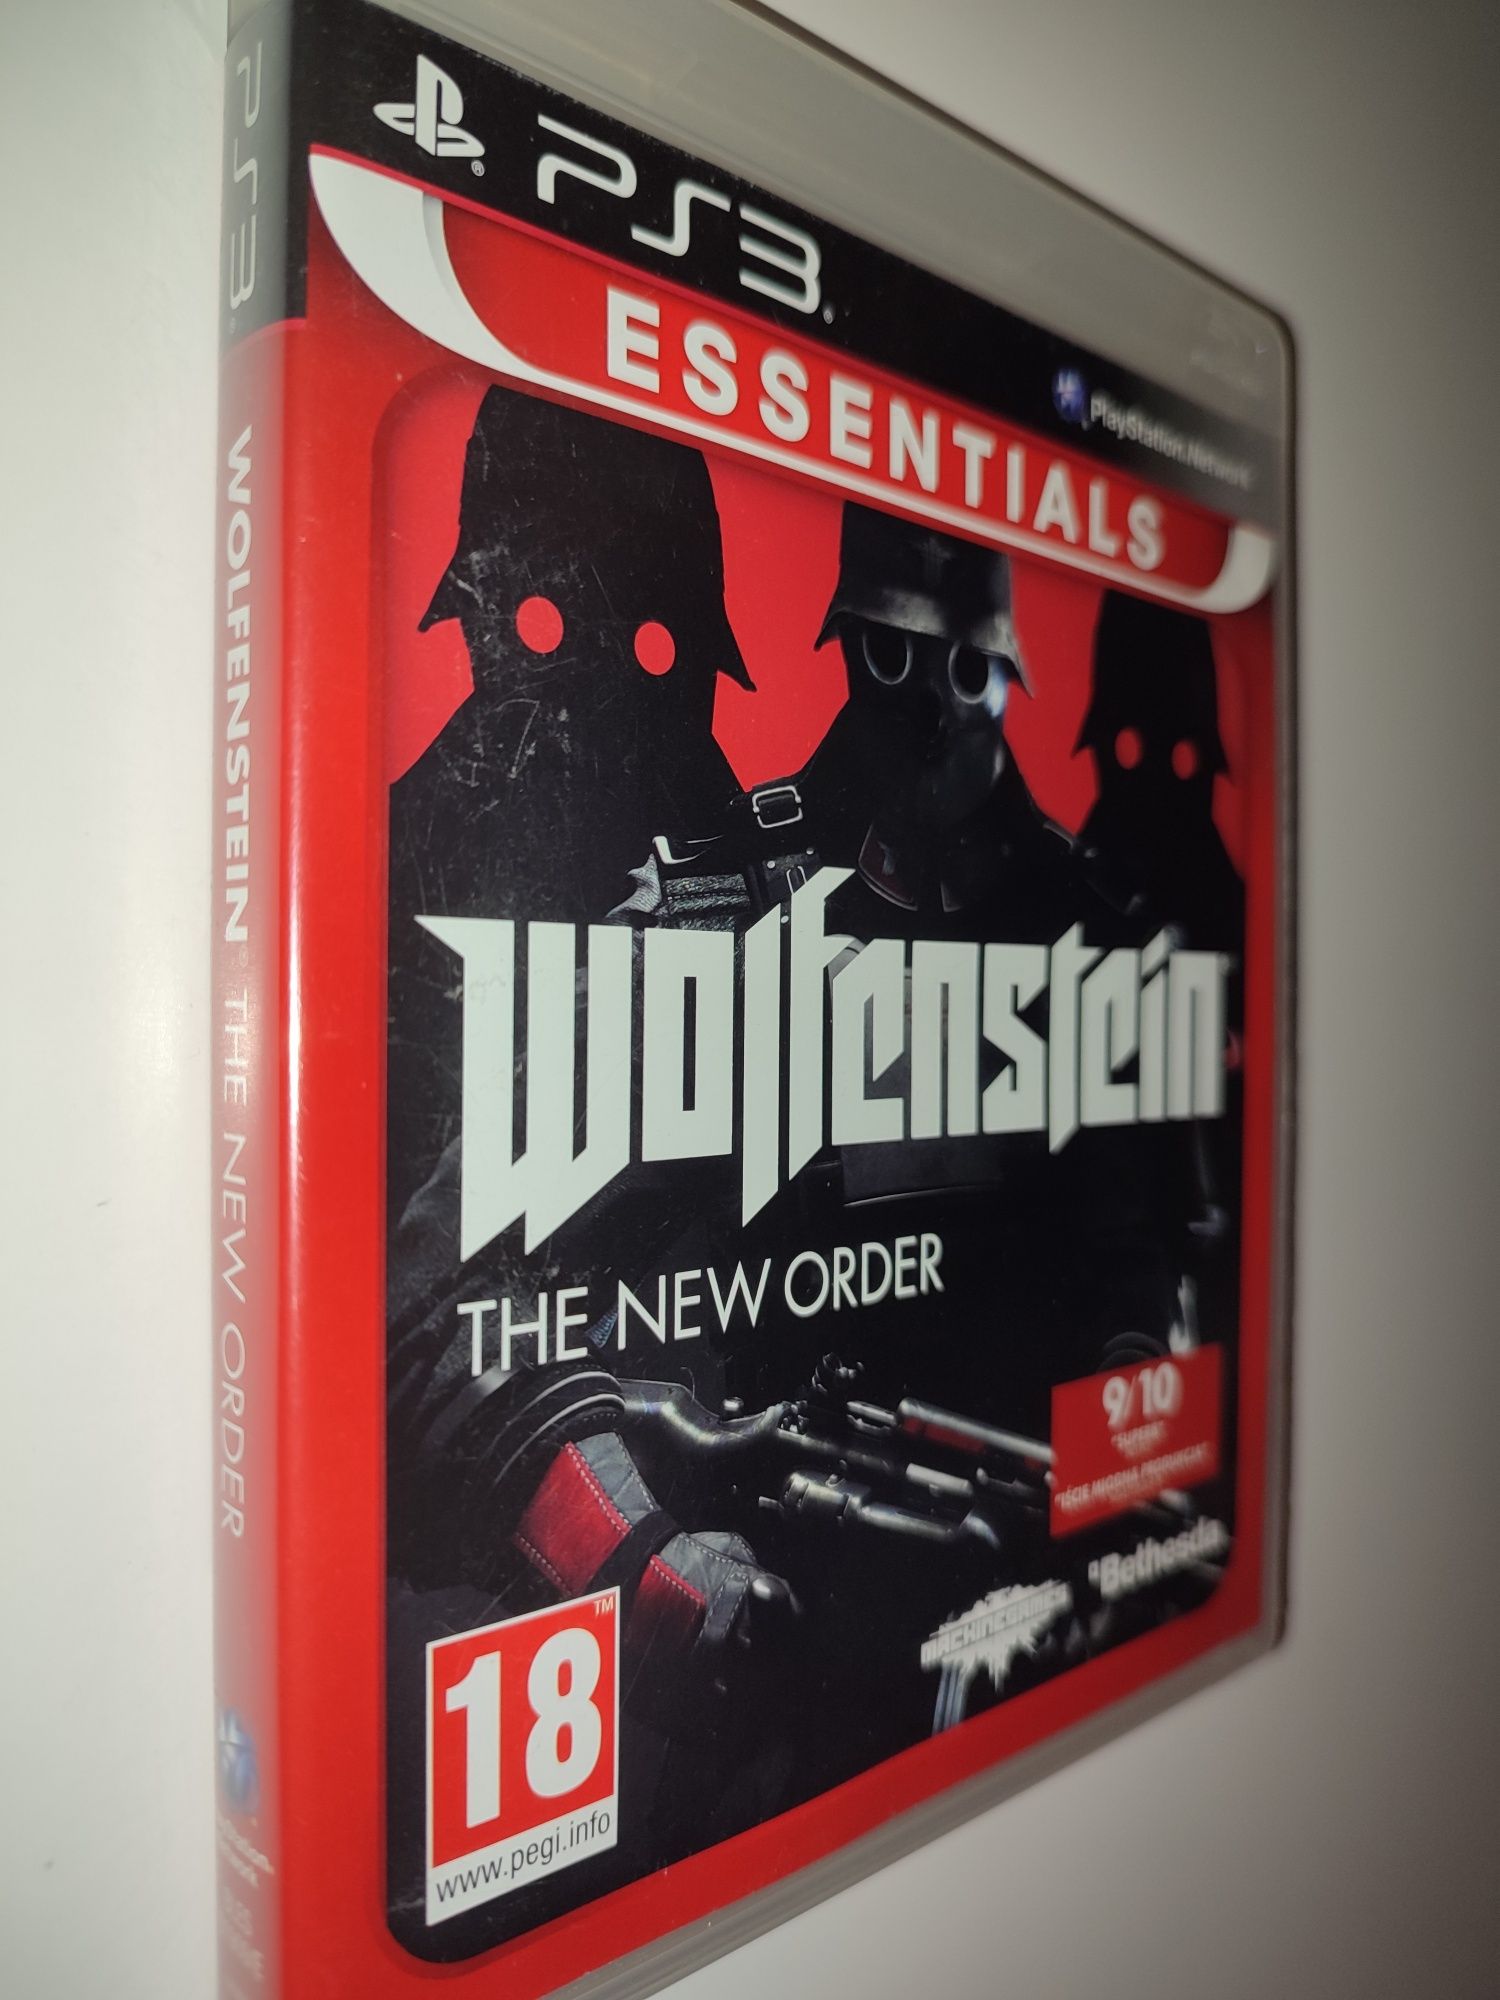 Gra Ps3 Wolfenstein The New Order PL gry PlayStation 3 Hit Sniper UFC